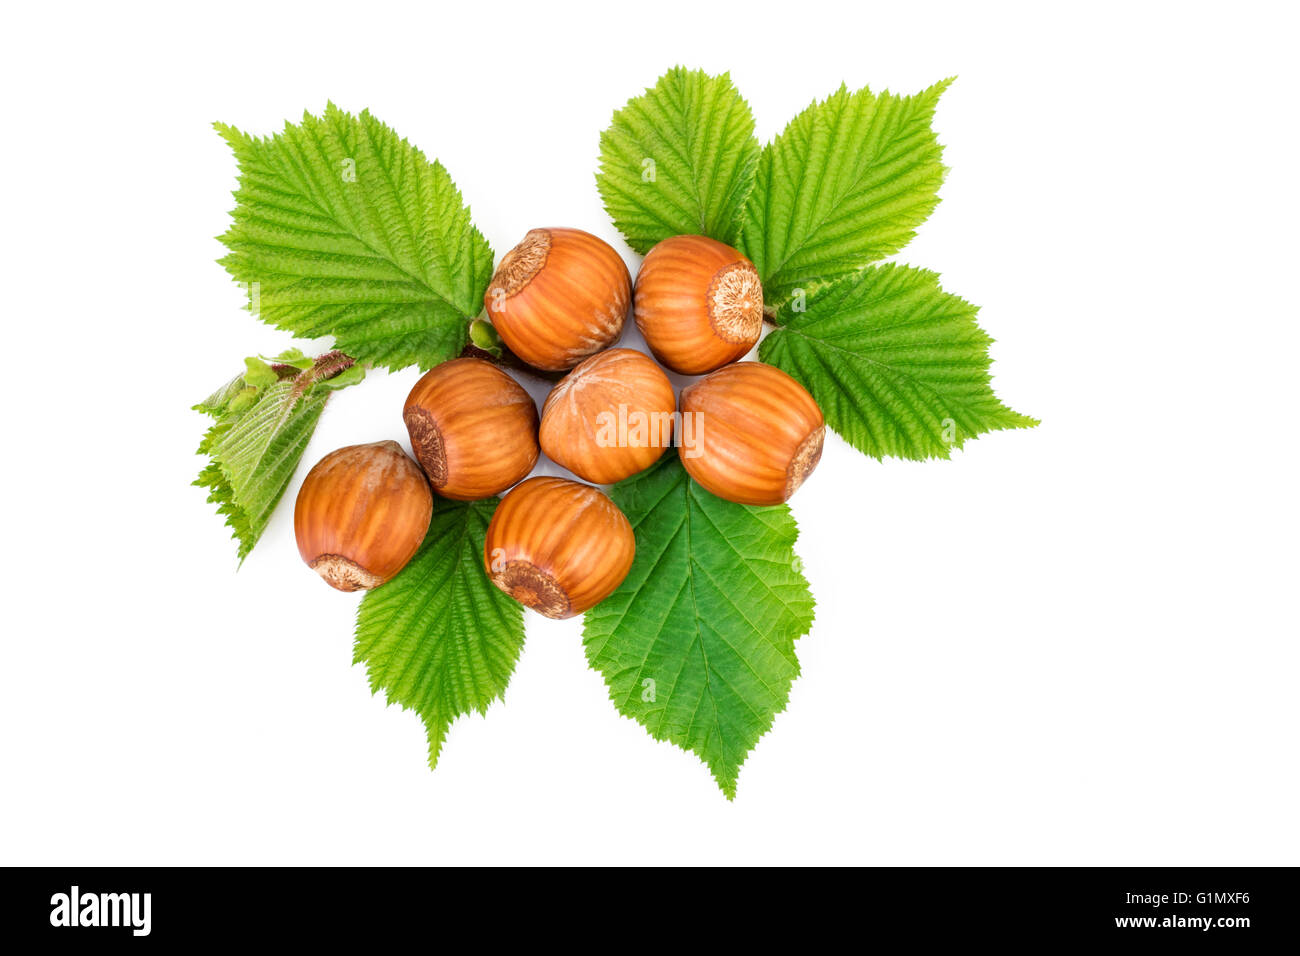 Hazelnut or filbert nuts with leaves on white. Flat lay, top view. Stock Photo